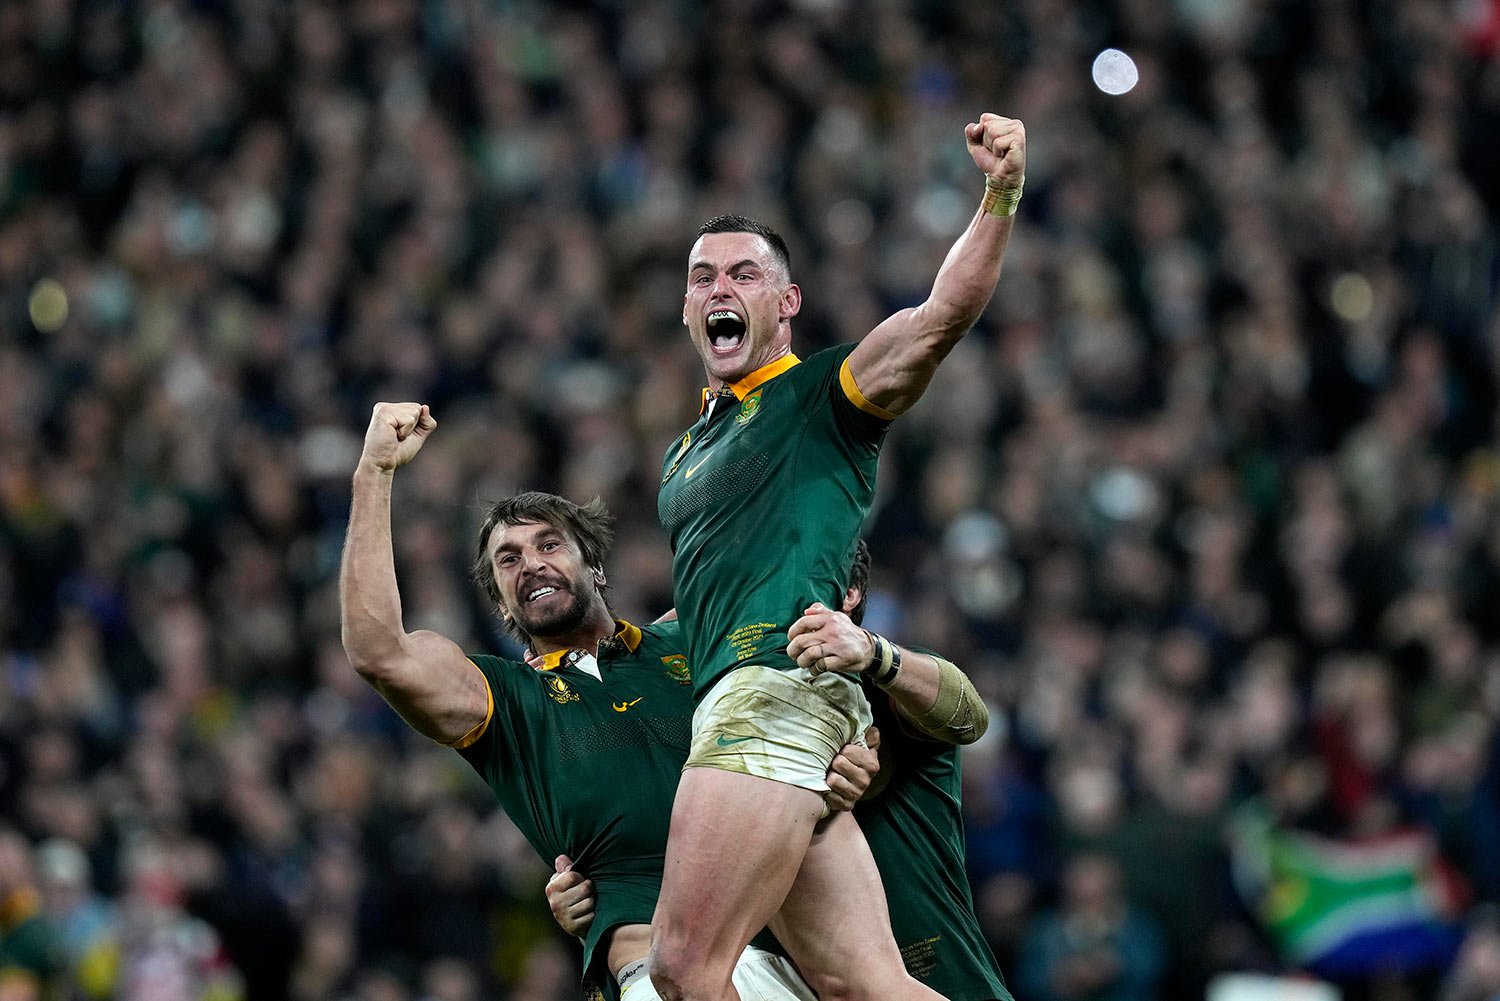  South Africa's Jesse Kriel, right, and South Africa's Eben Etzebeth celebrate after the Rugby World Cup final match between New Zealand and South Africa at the Stade de France in Saint-Denis, near Paris Saturday, Oct. 28, 2023. South Africa won the 